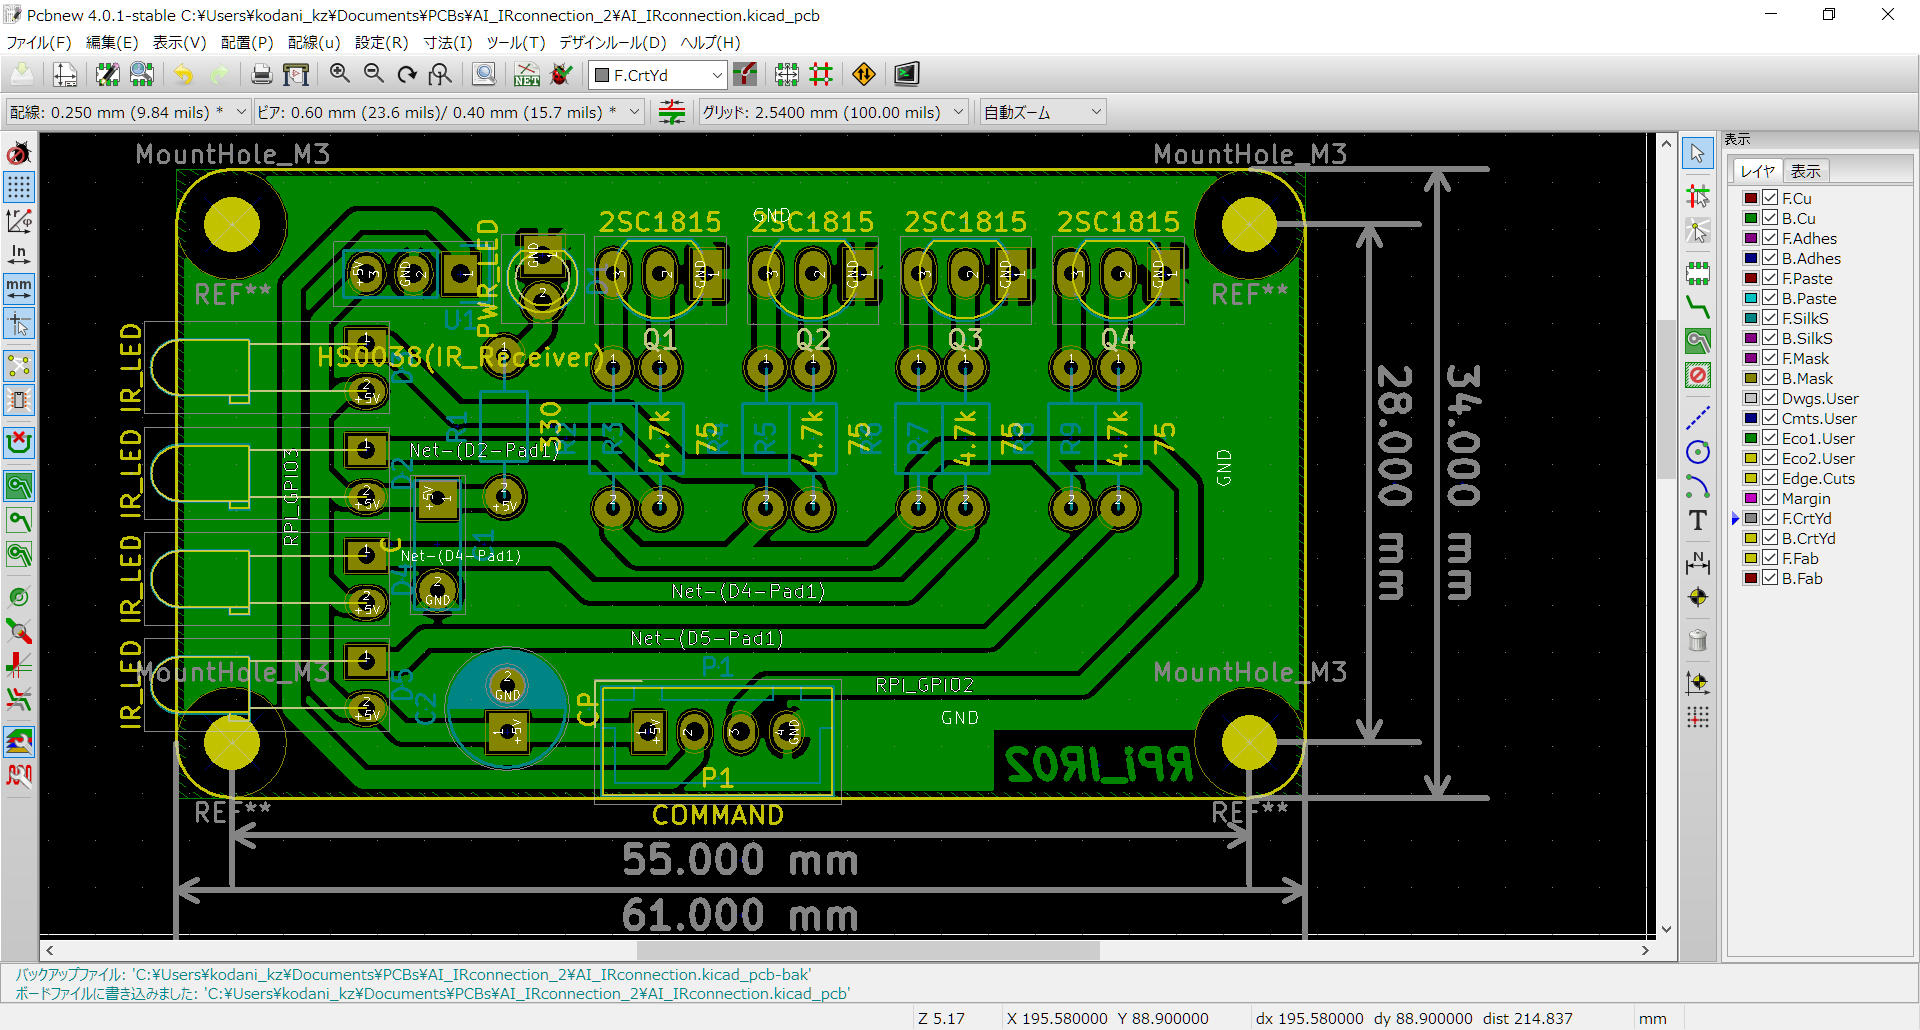 SnapCrab_Pcbnew 401-stable CUserskodani_kzDocumentsPCBsAI_IRconnection_2AI_IRconnectionkicad_pcb_2019-4-16_22-29-45_No-00.png